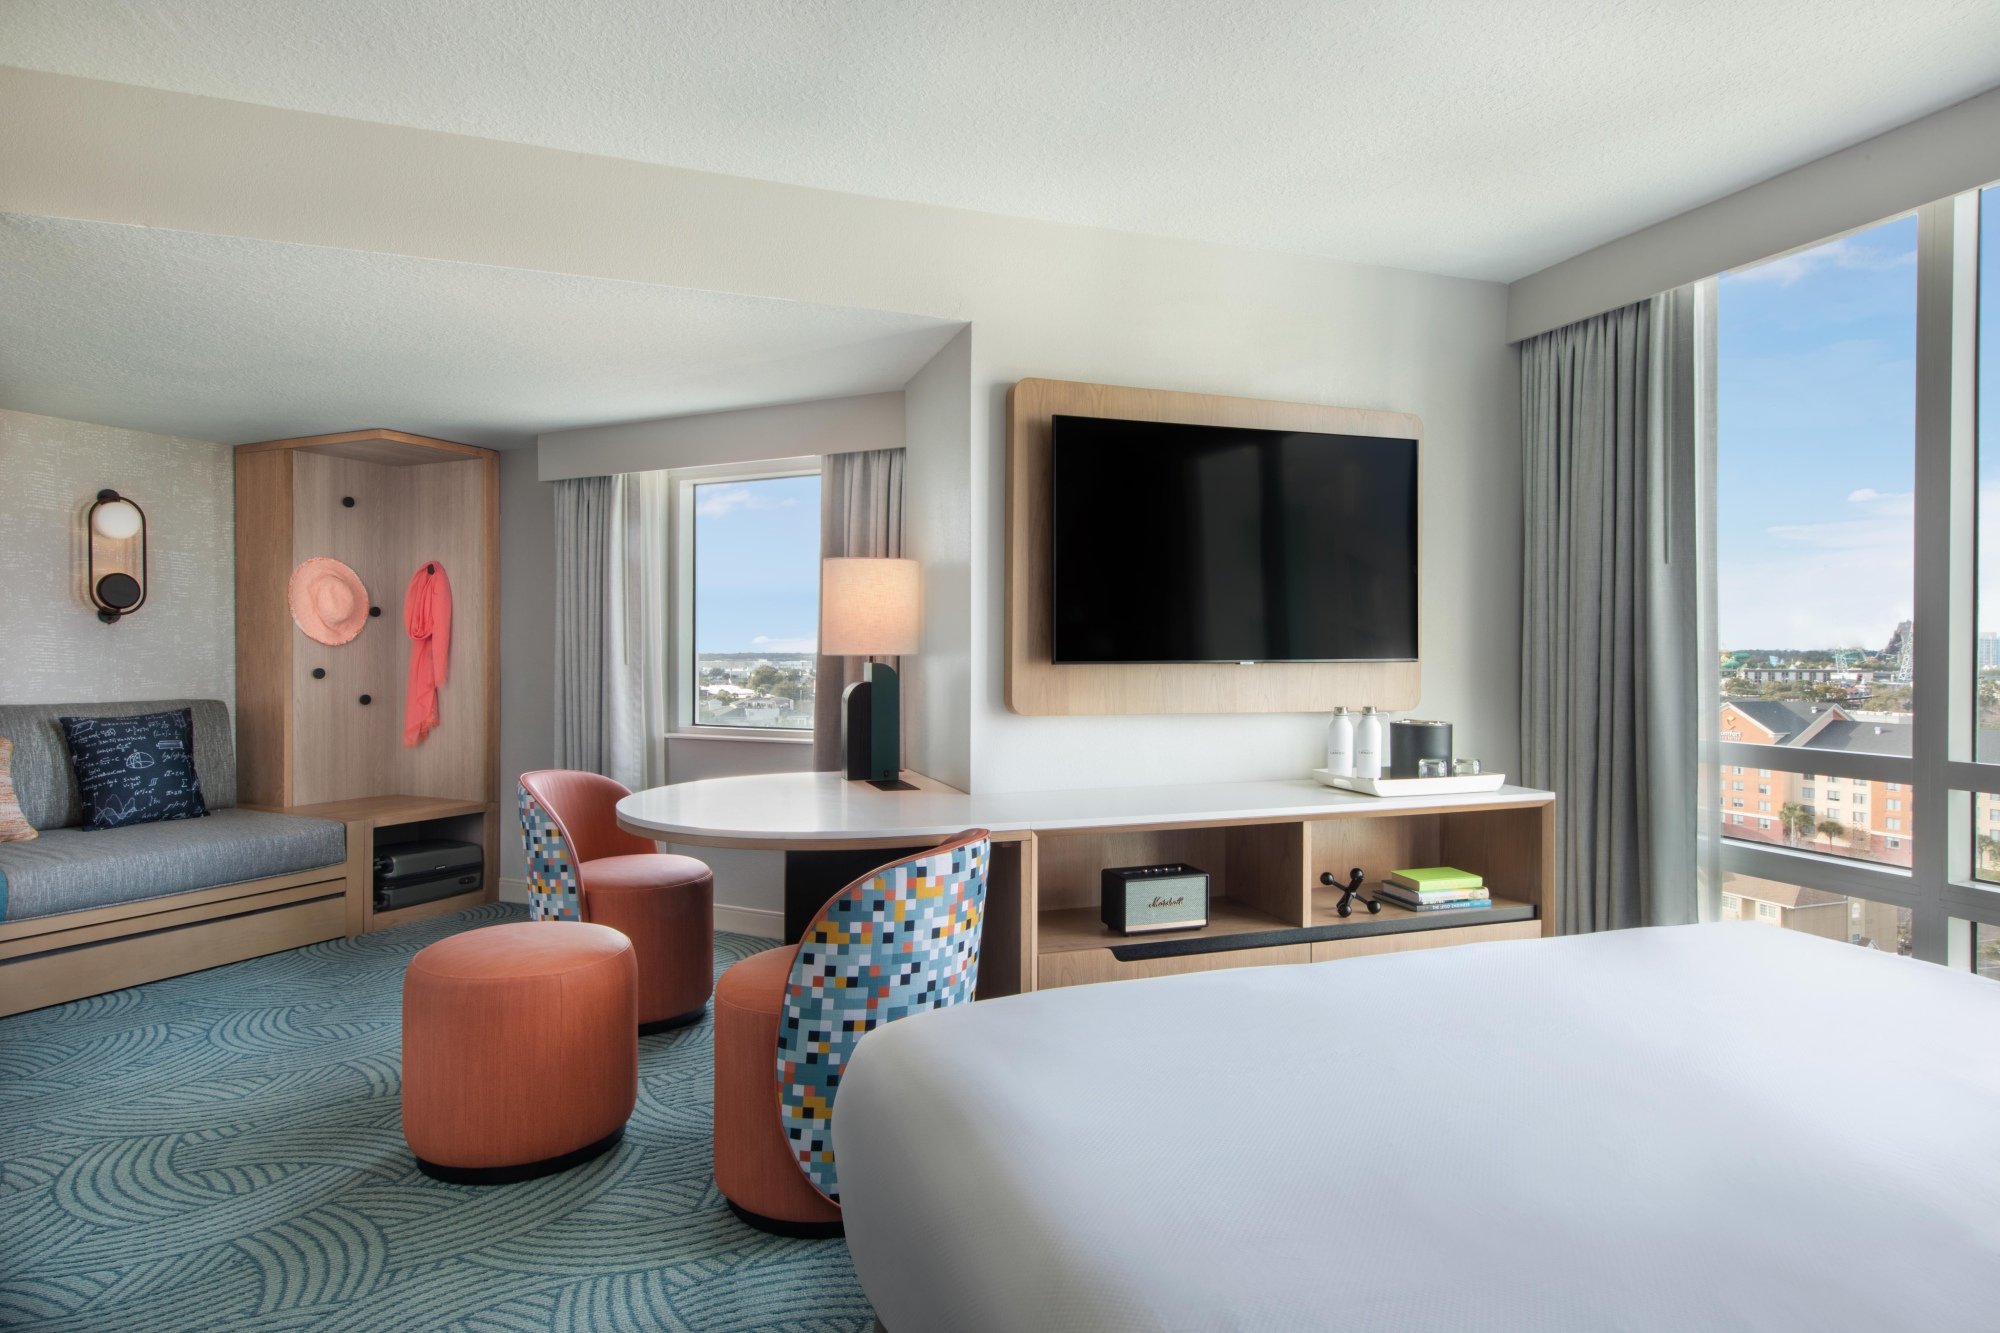 The interior of the Junior Suite at Hotel Landy. The room includes a large bed, workspace, flatscreen tv and bench.